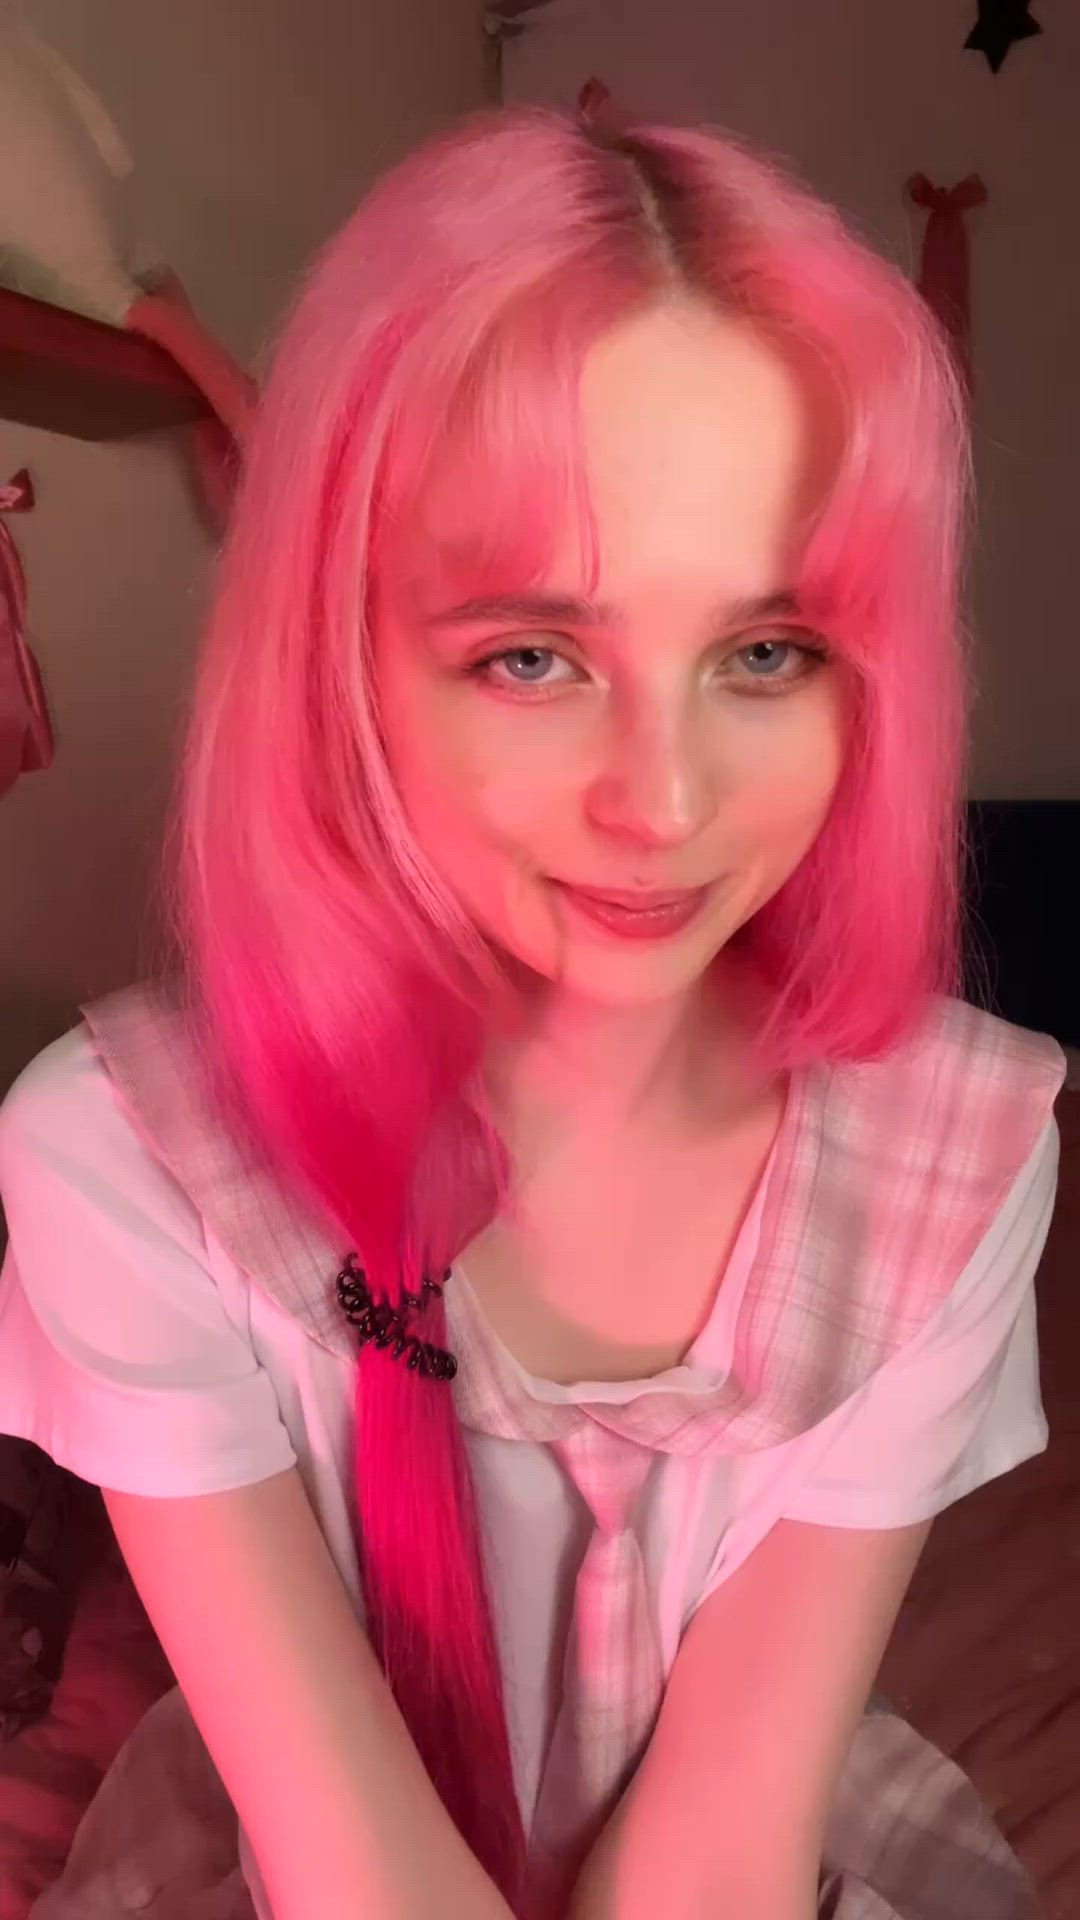 Ahegao porn video with onlyfans model loliness <strong>@myloliness</strong>